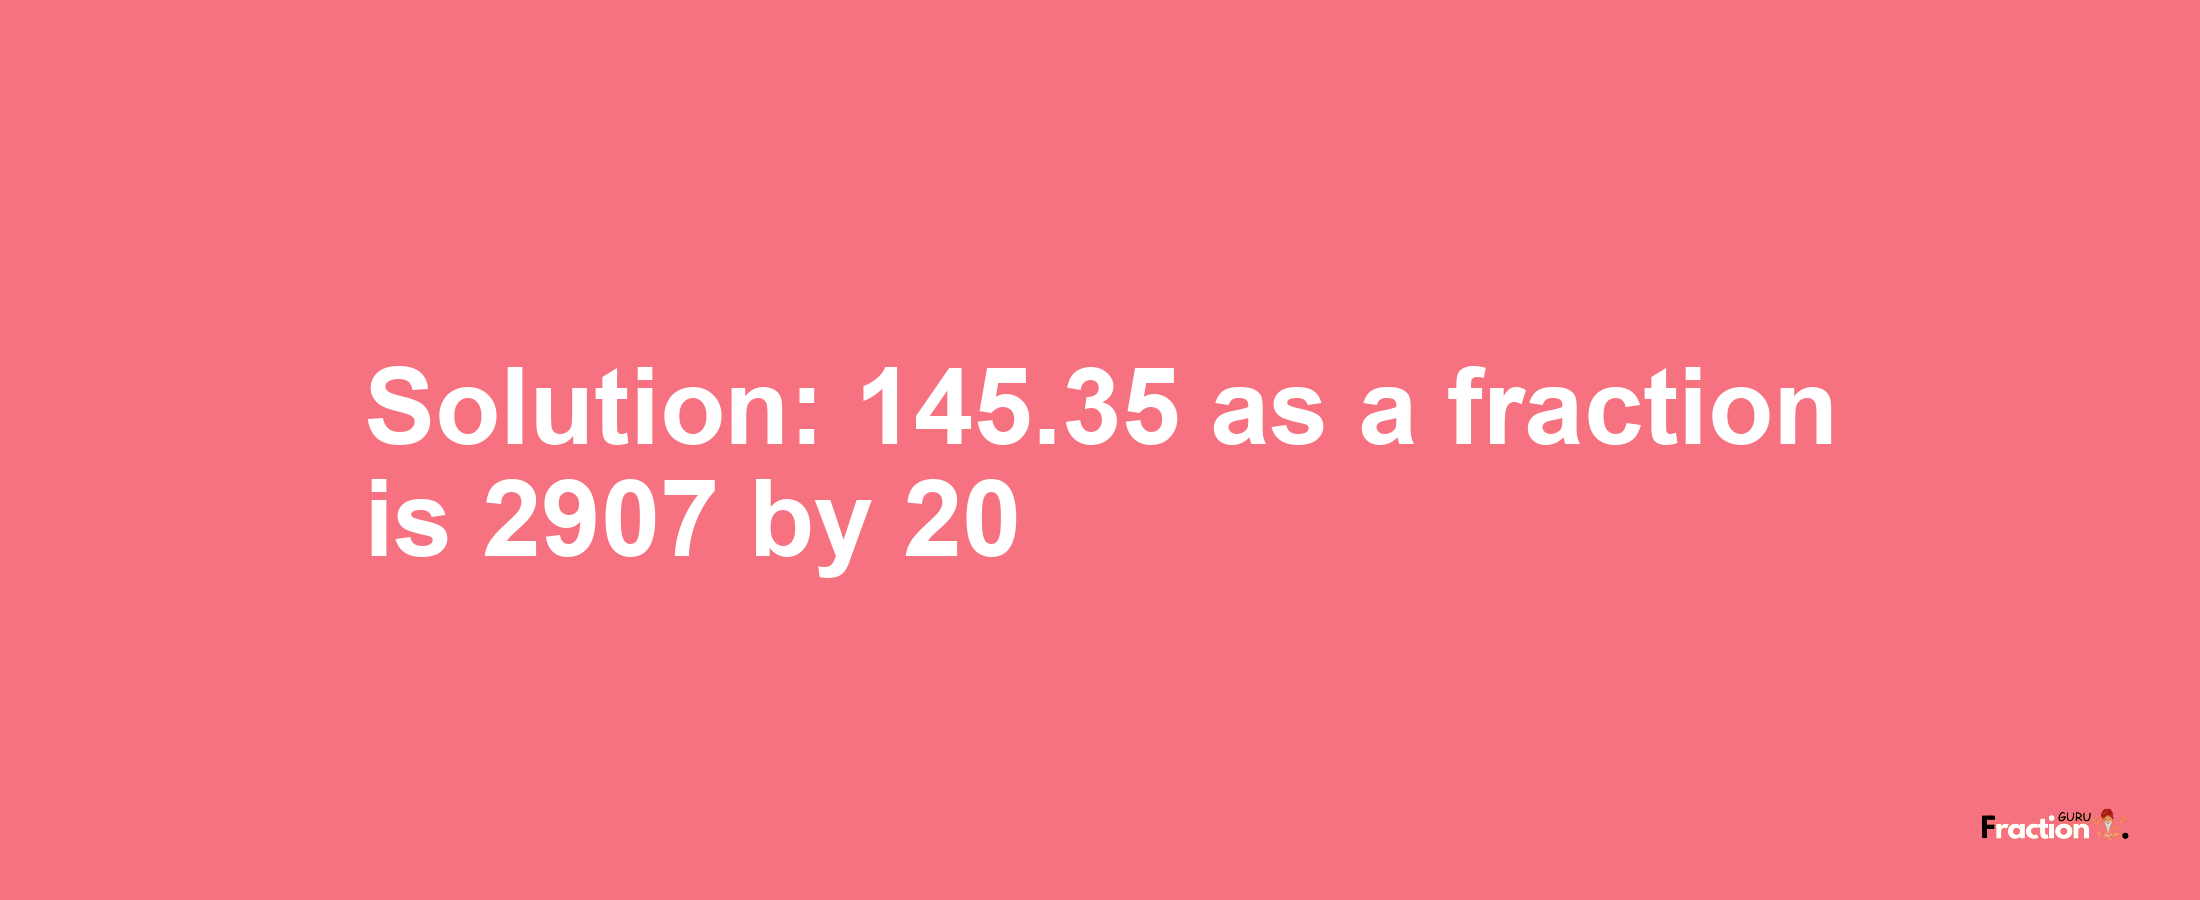 Solution:145.35 as a fraction is 2907/20